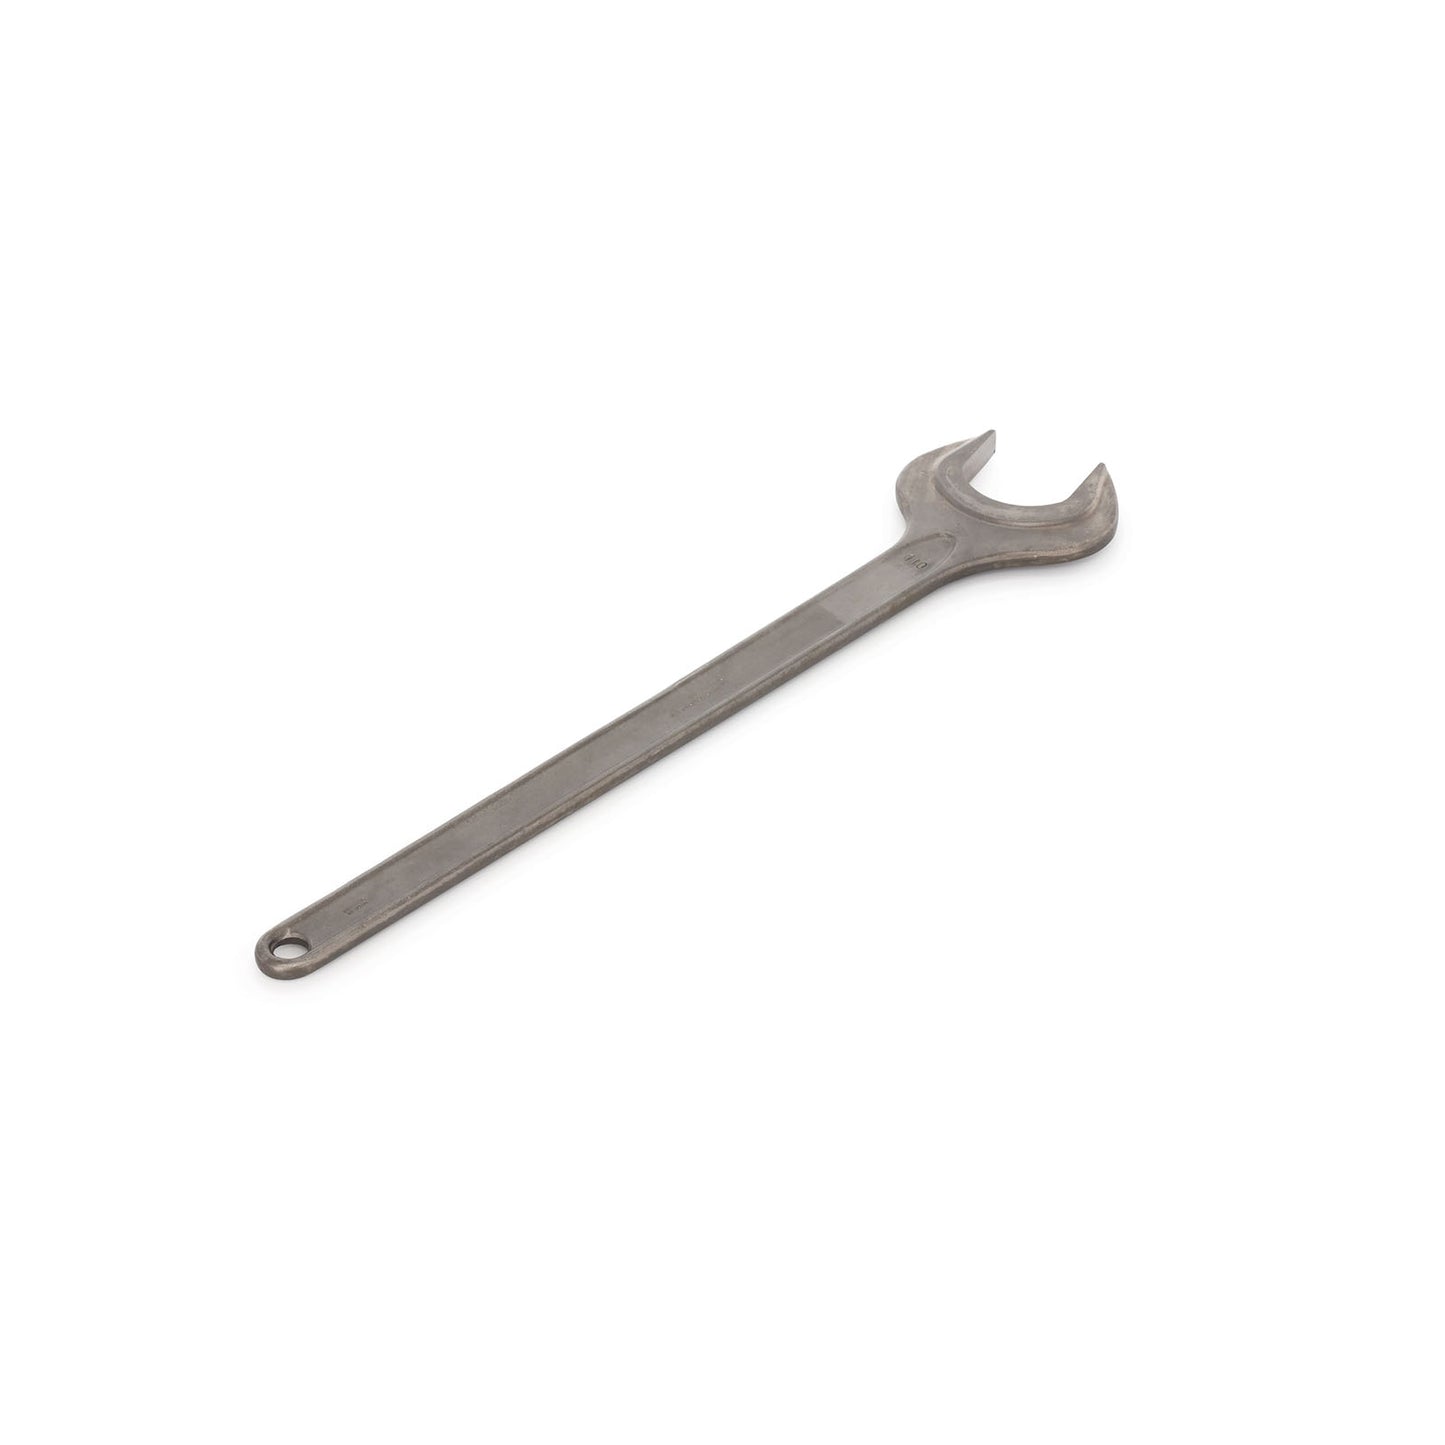 GEDORE 894 110 - 1 Open End Wrench, 110mm (6578400)